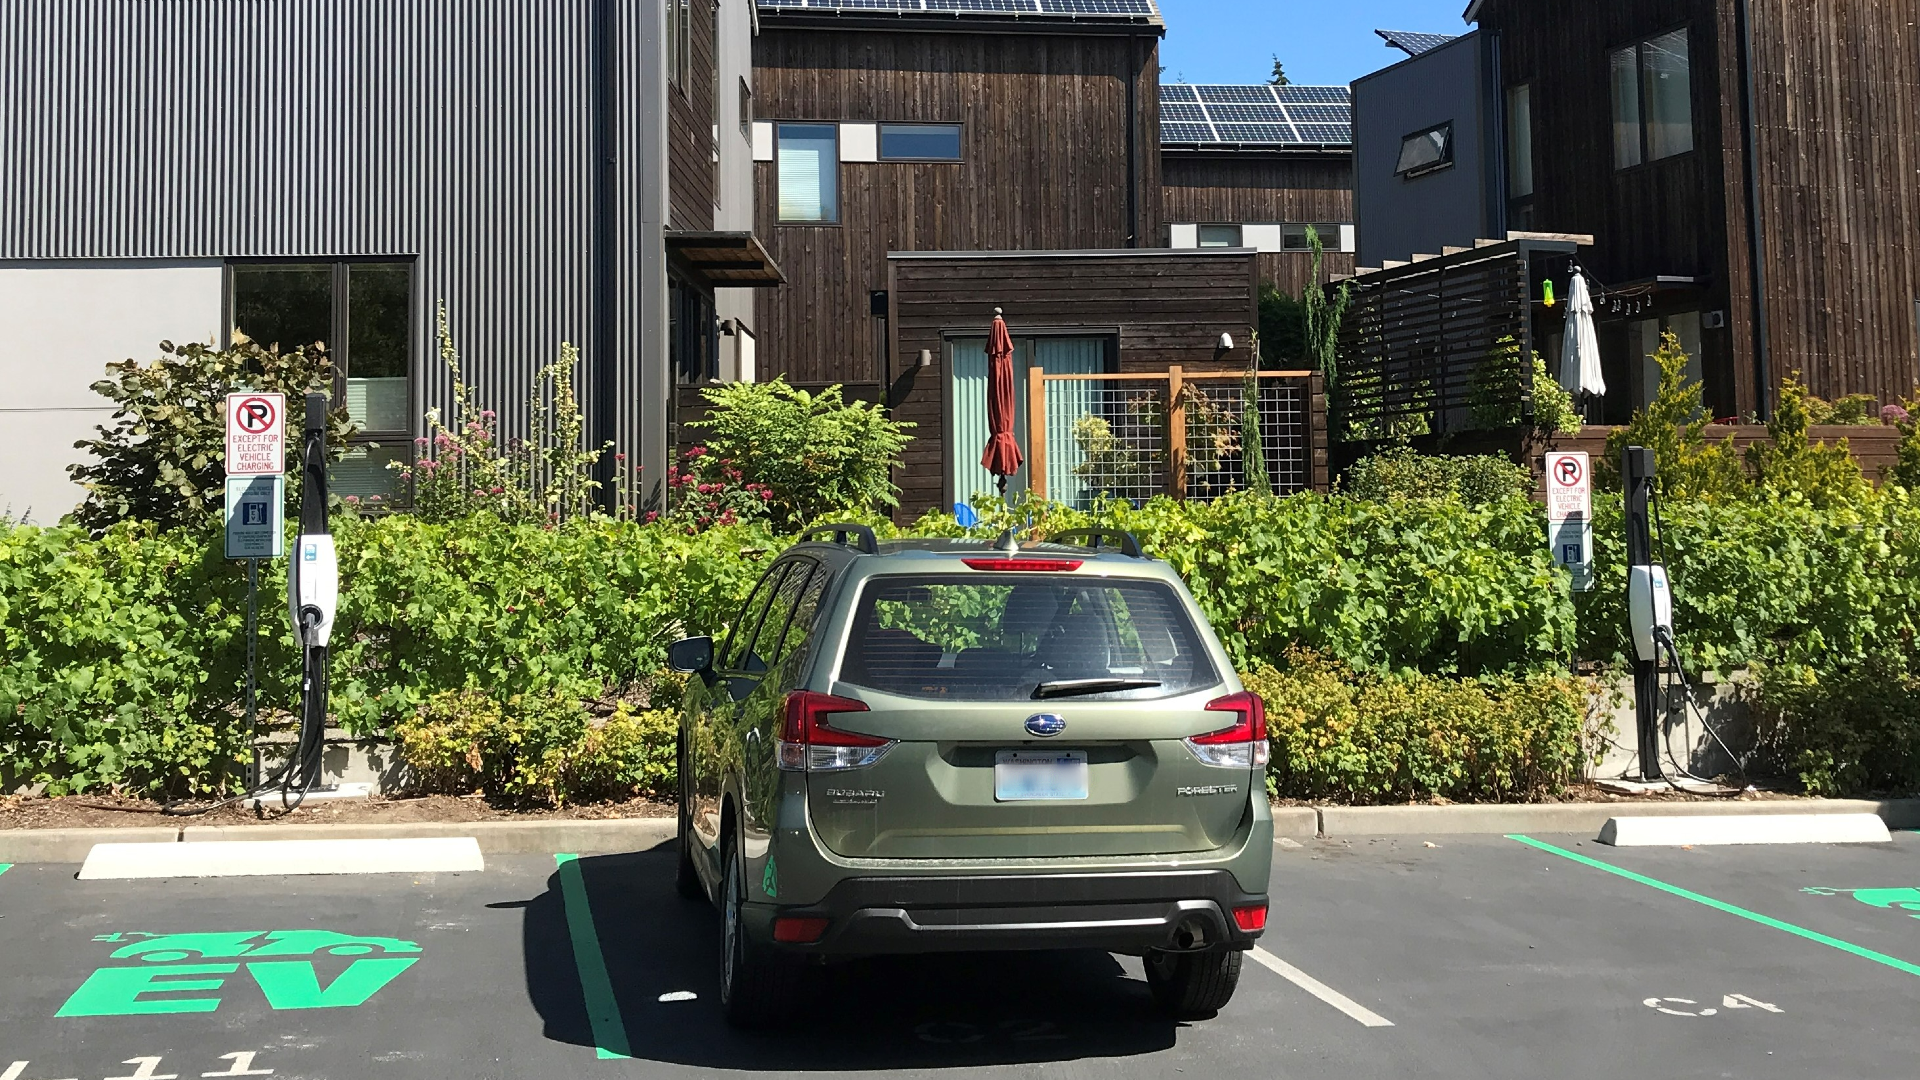 Grow Community on Bainbridge Island was one of 35 properties in our service area to receive electric vehicle charging for its tenants through our Multifamily Charging pilot.